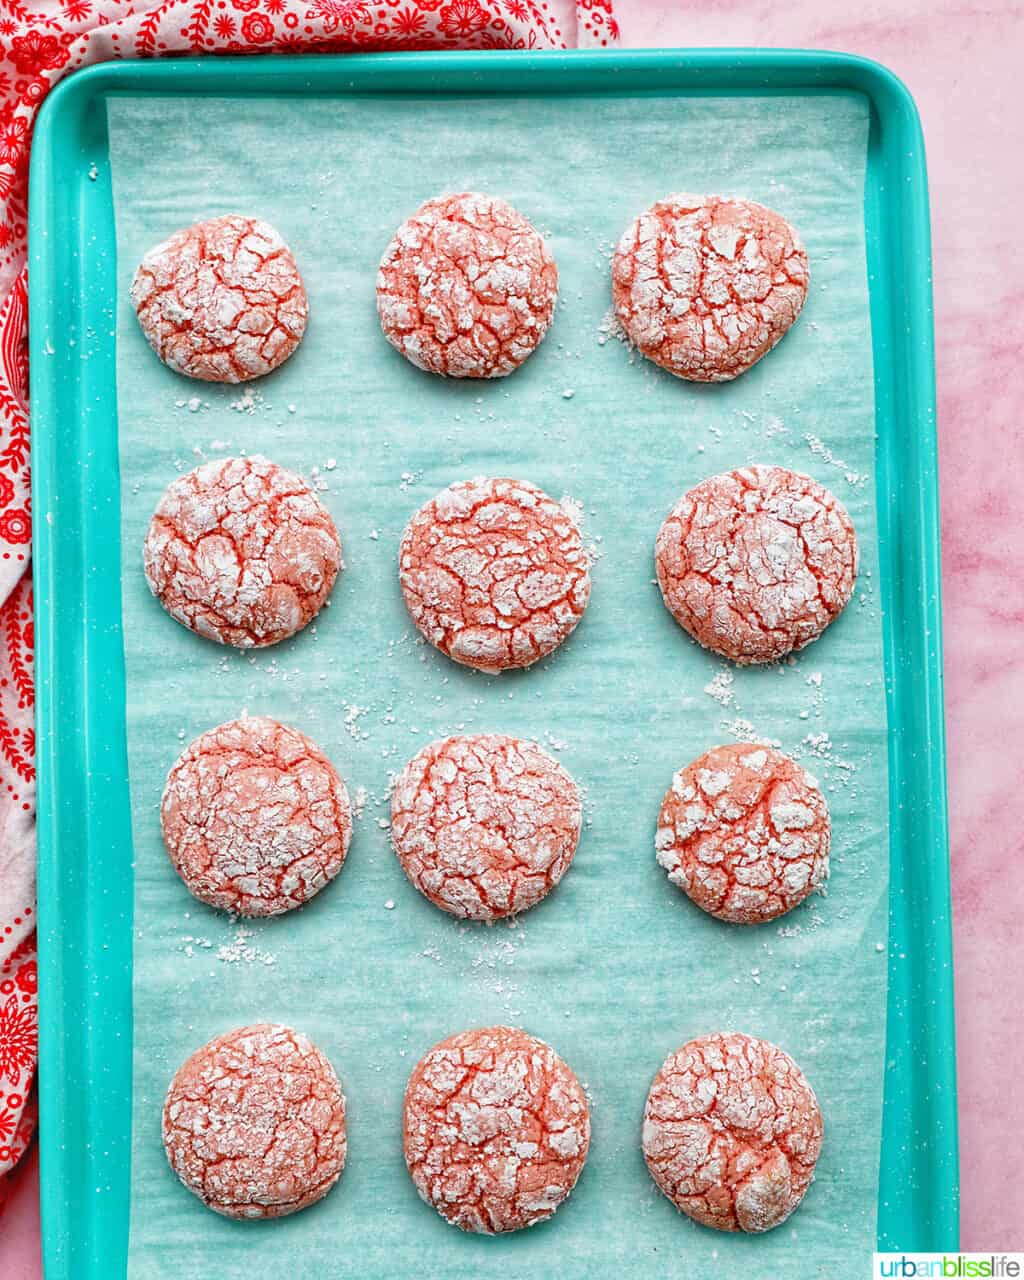 strawberry crinkle cookies baked on baking sheet